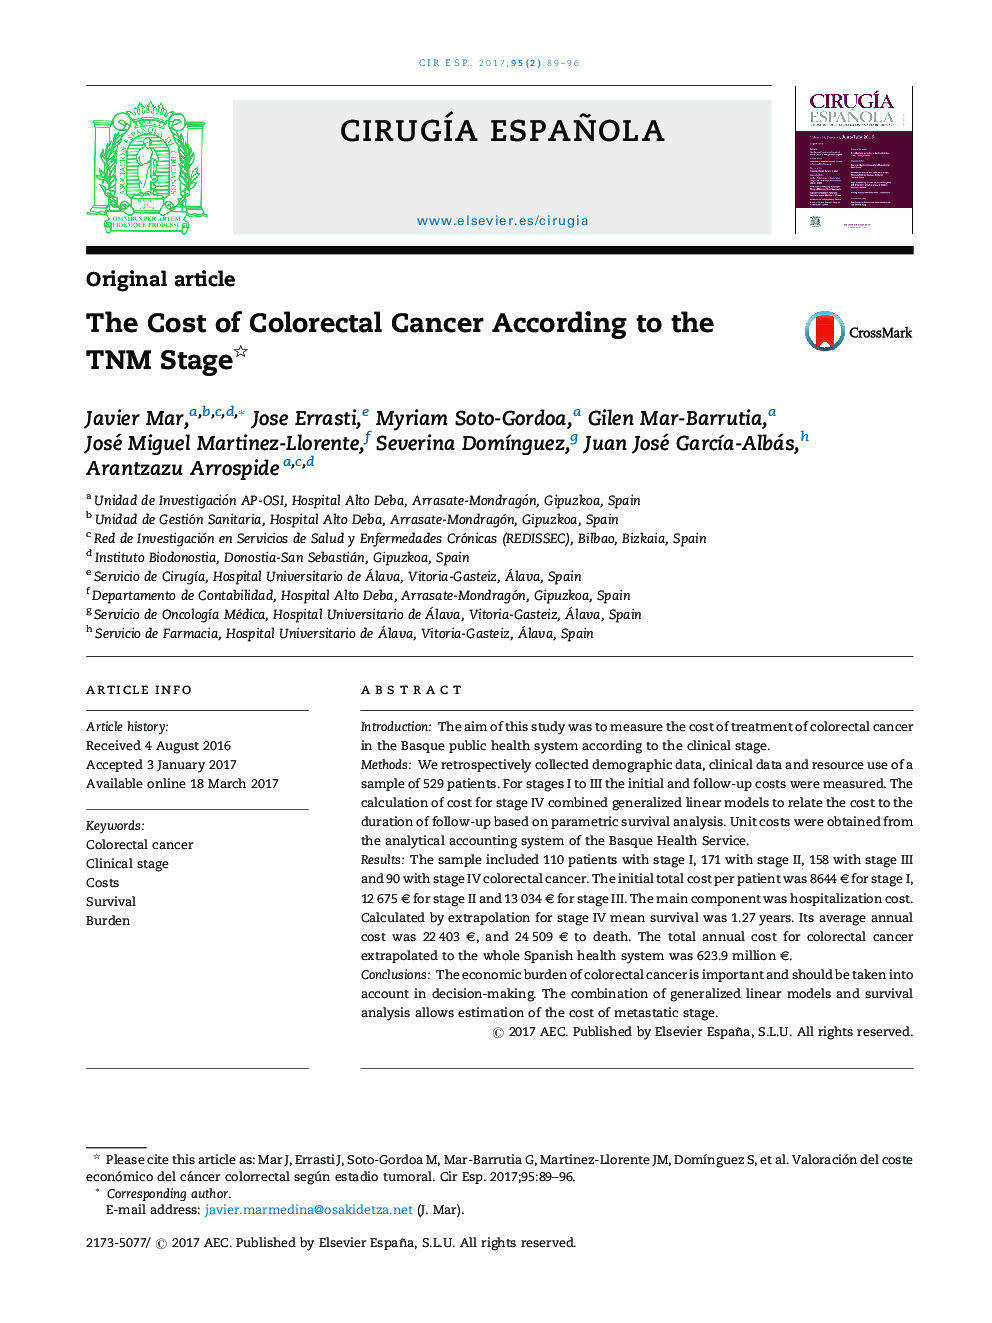 The Cost of Colorectal Cancer According to the TNM Stage